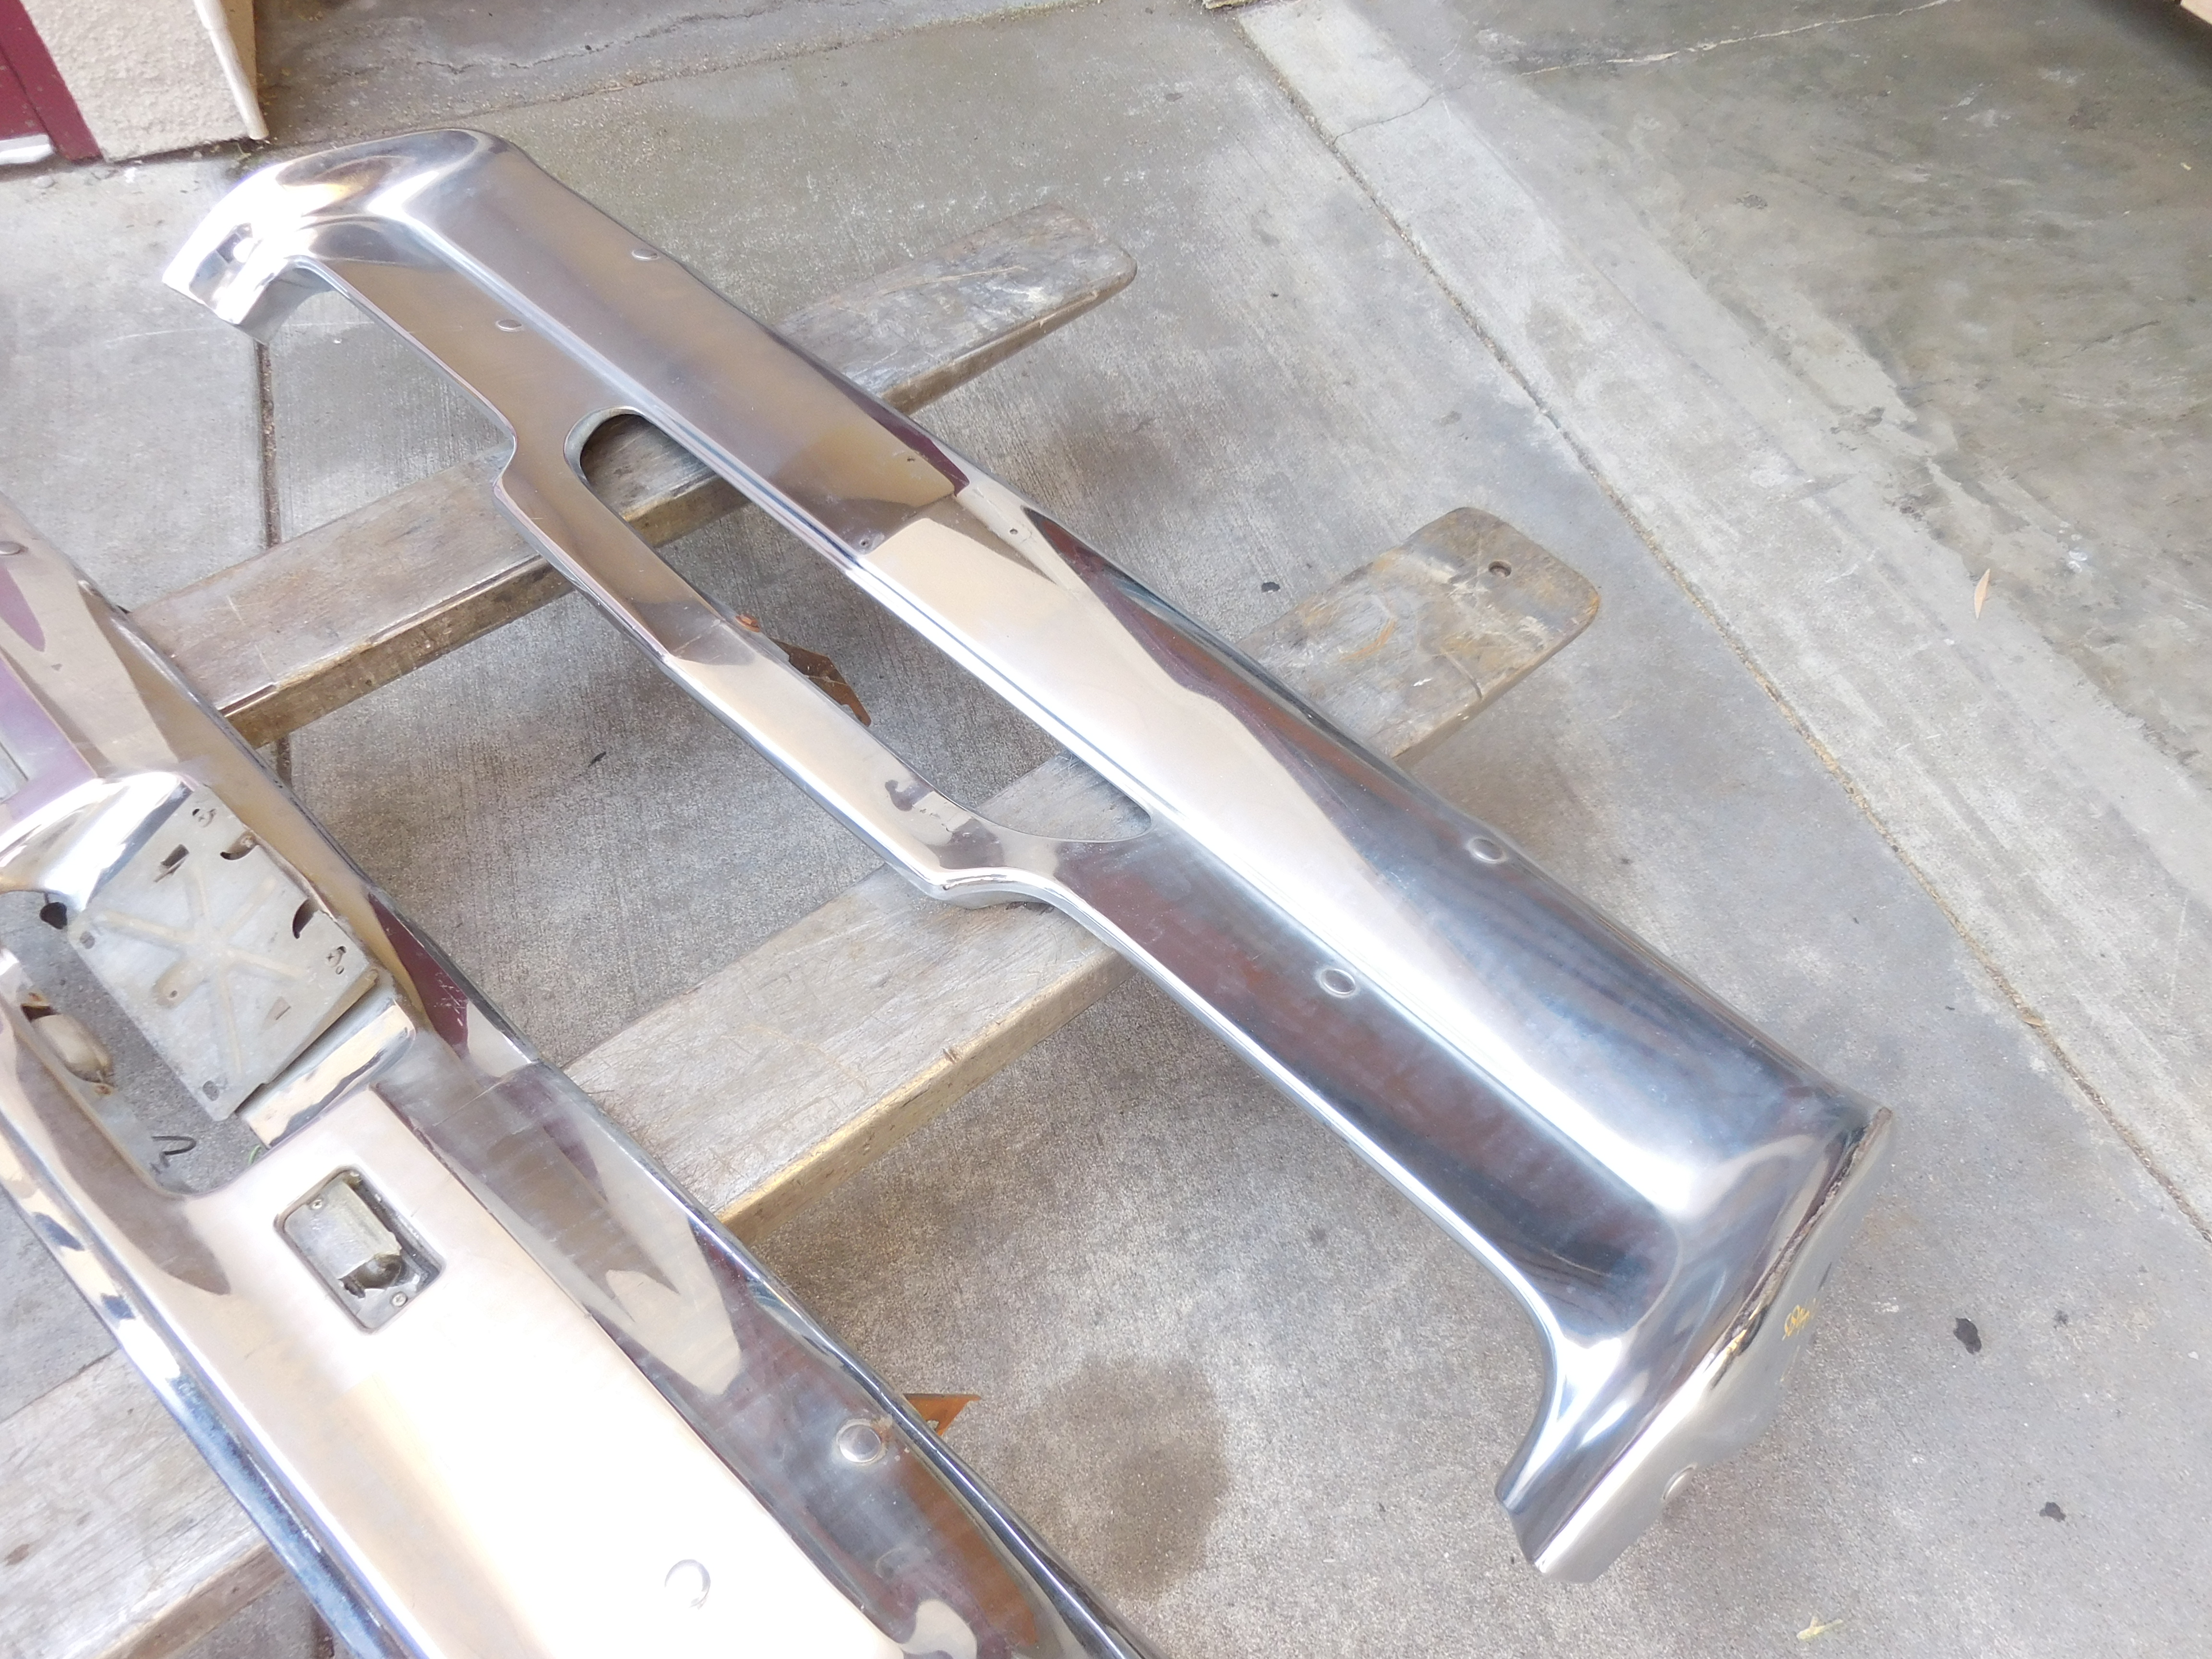 1967 Oldsmobile Cutlass Front Rear Bumpers